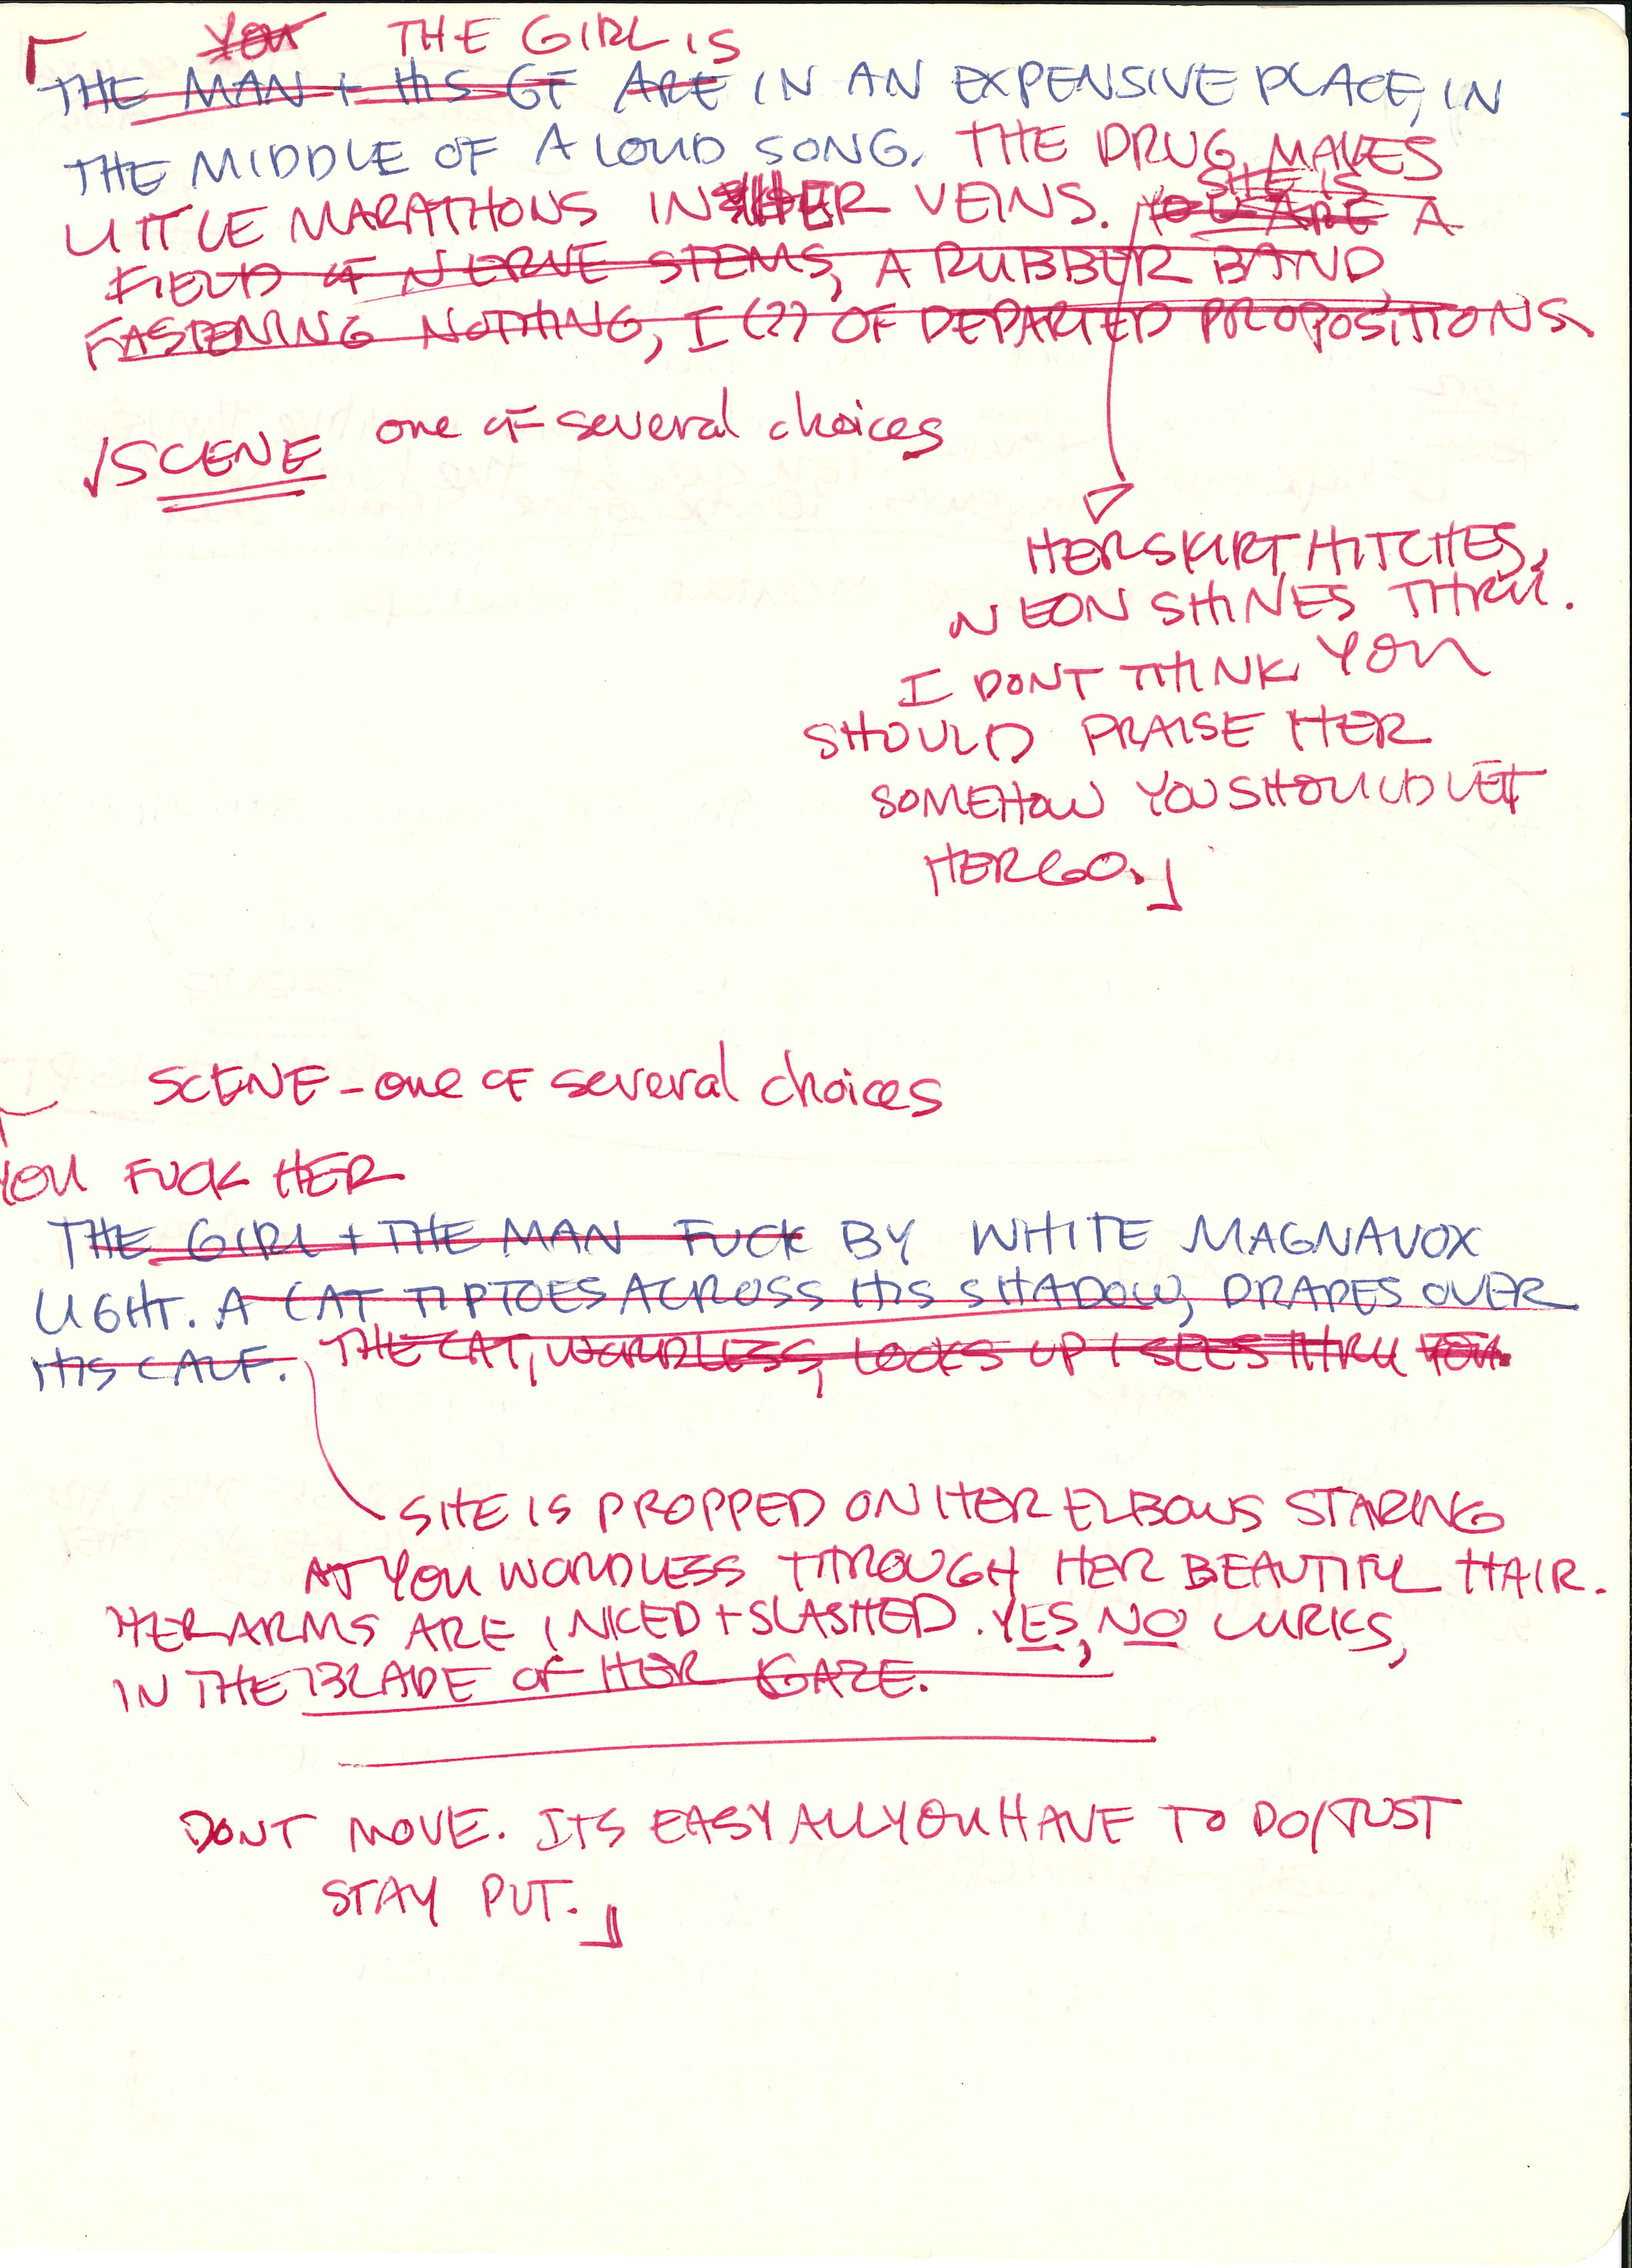 Acrobats Of The Psychic Misdemeanor Part 2 Emily Carr Field Notes On The Work And The Life Behind The Work By Adrian Silbernagel The Operating System Liminal Lab Medium